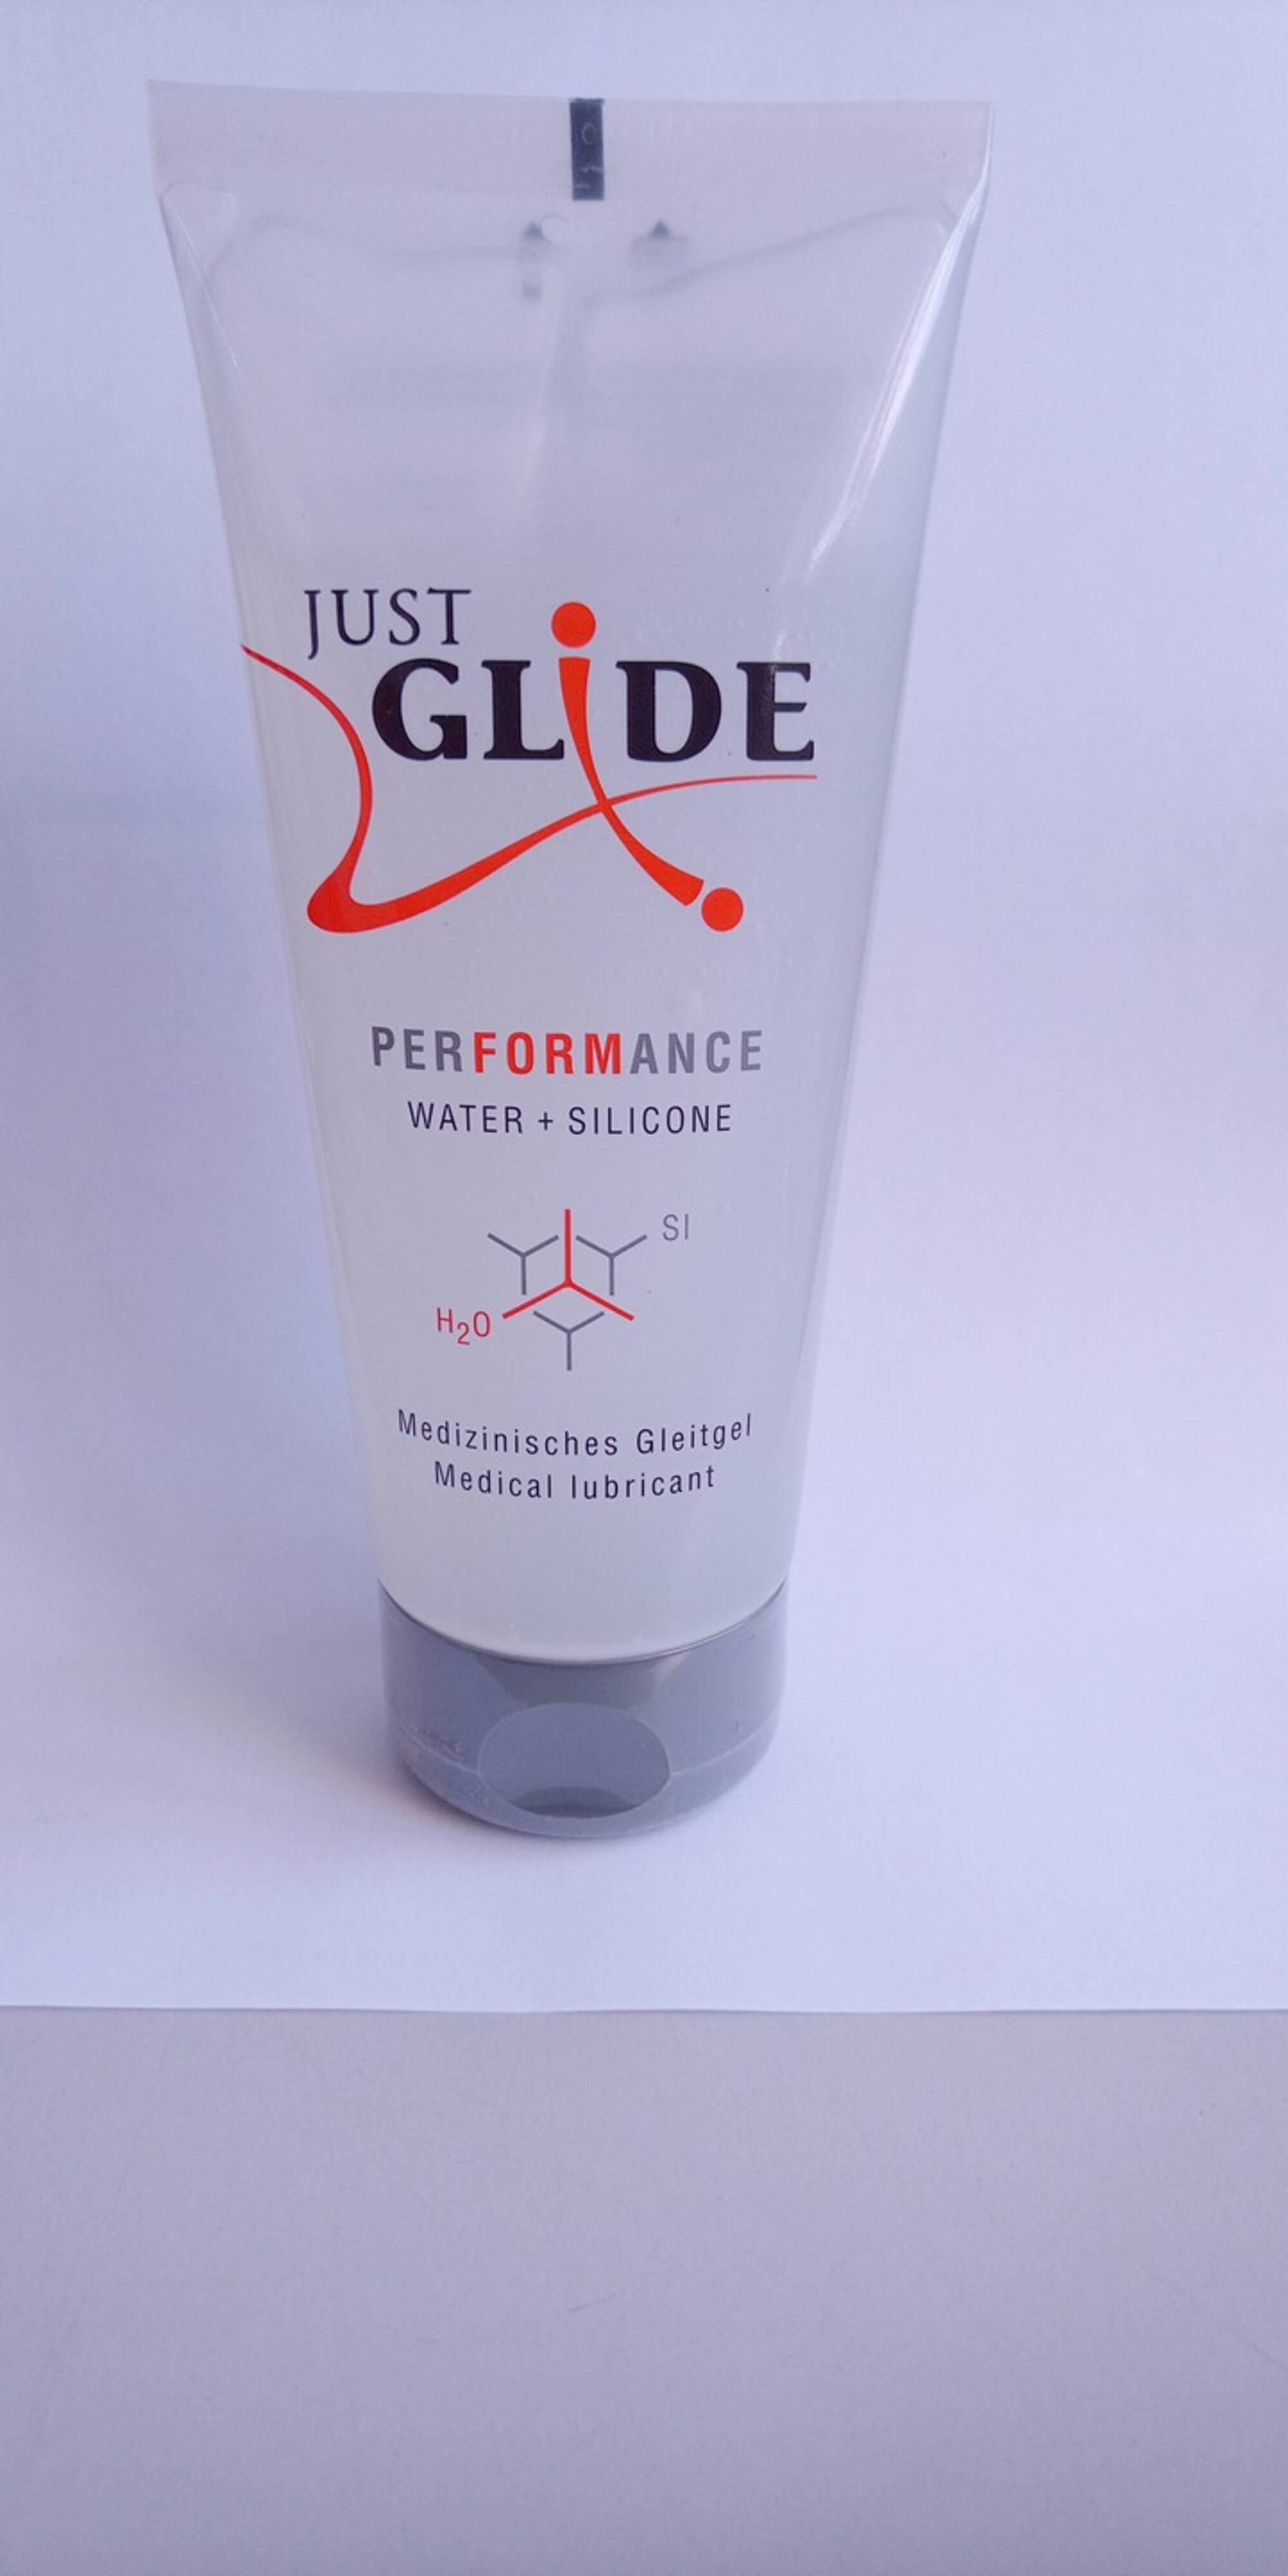 JUST GLIDE - Perfomance water + silicone  lubricant